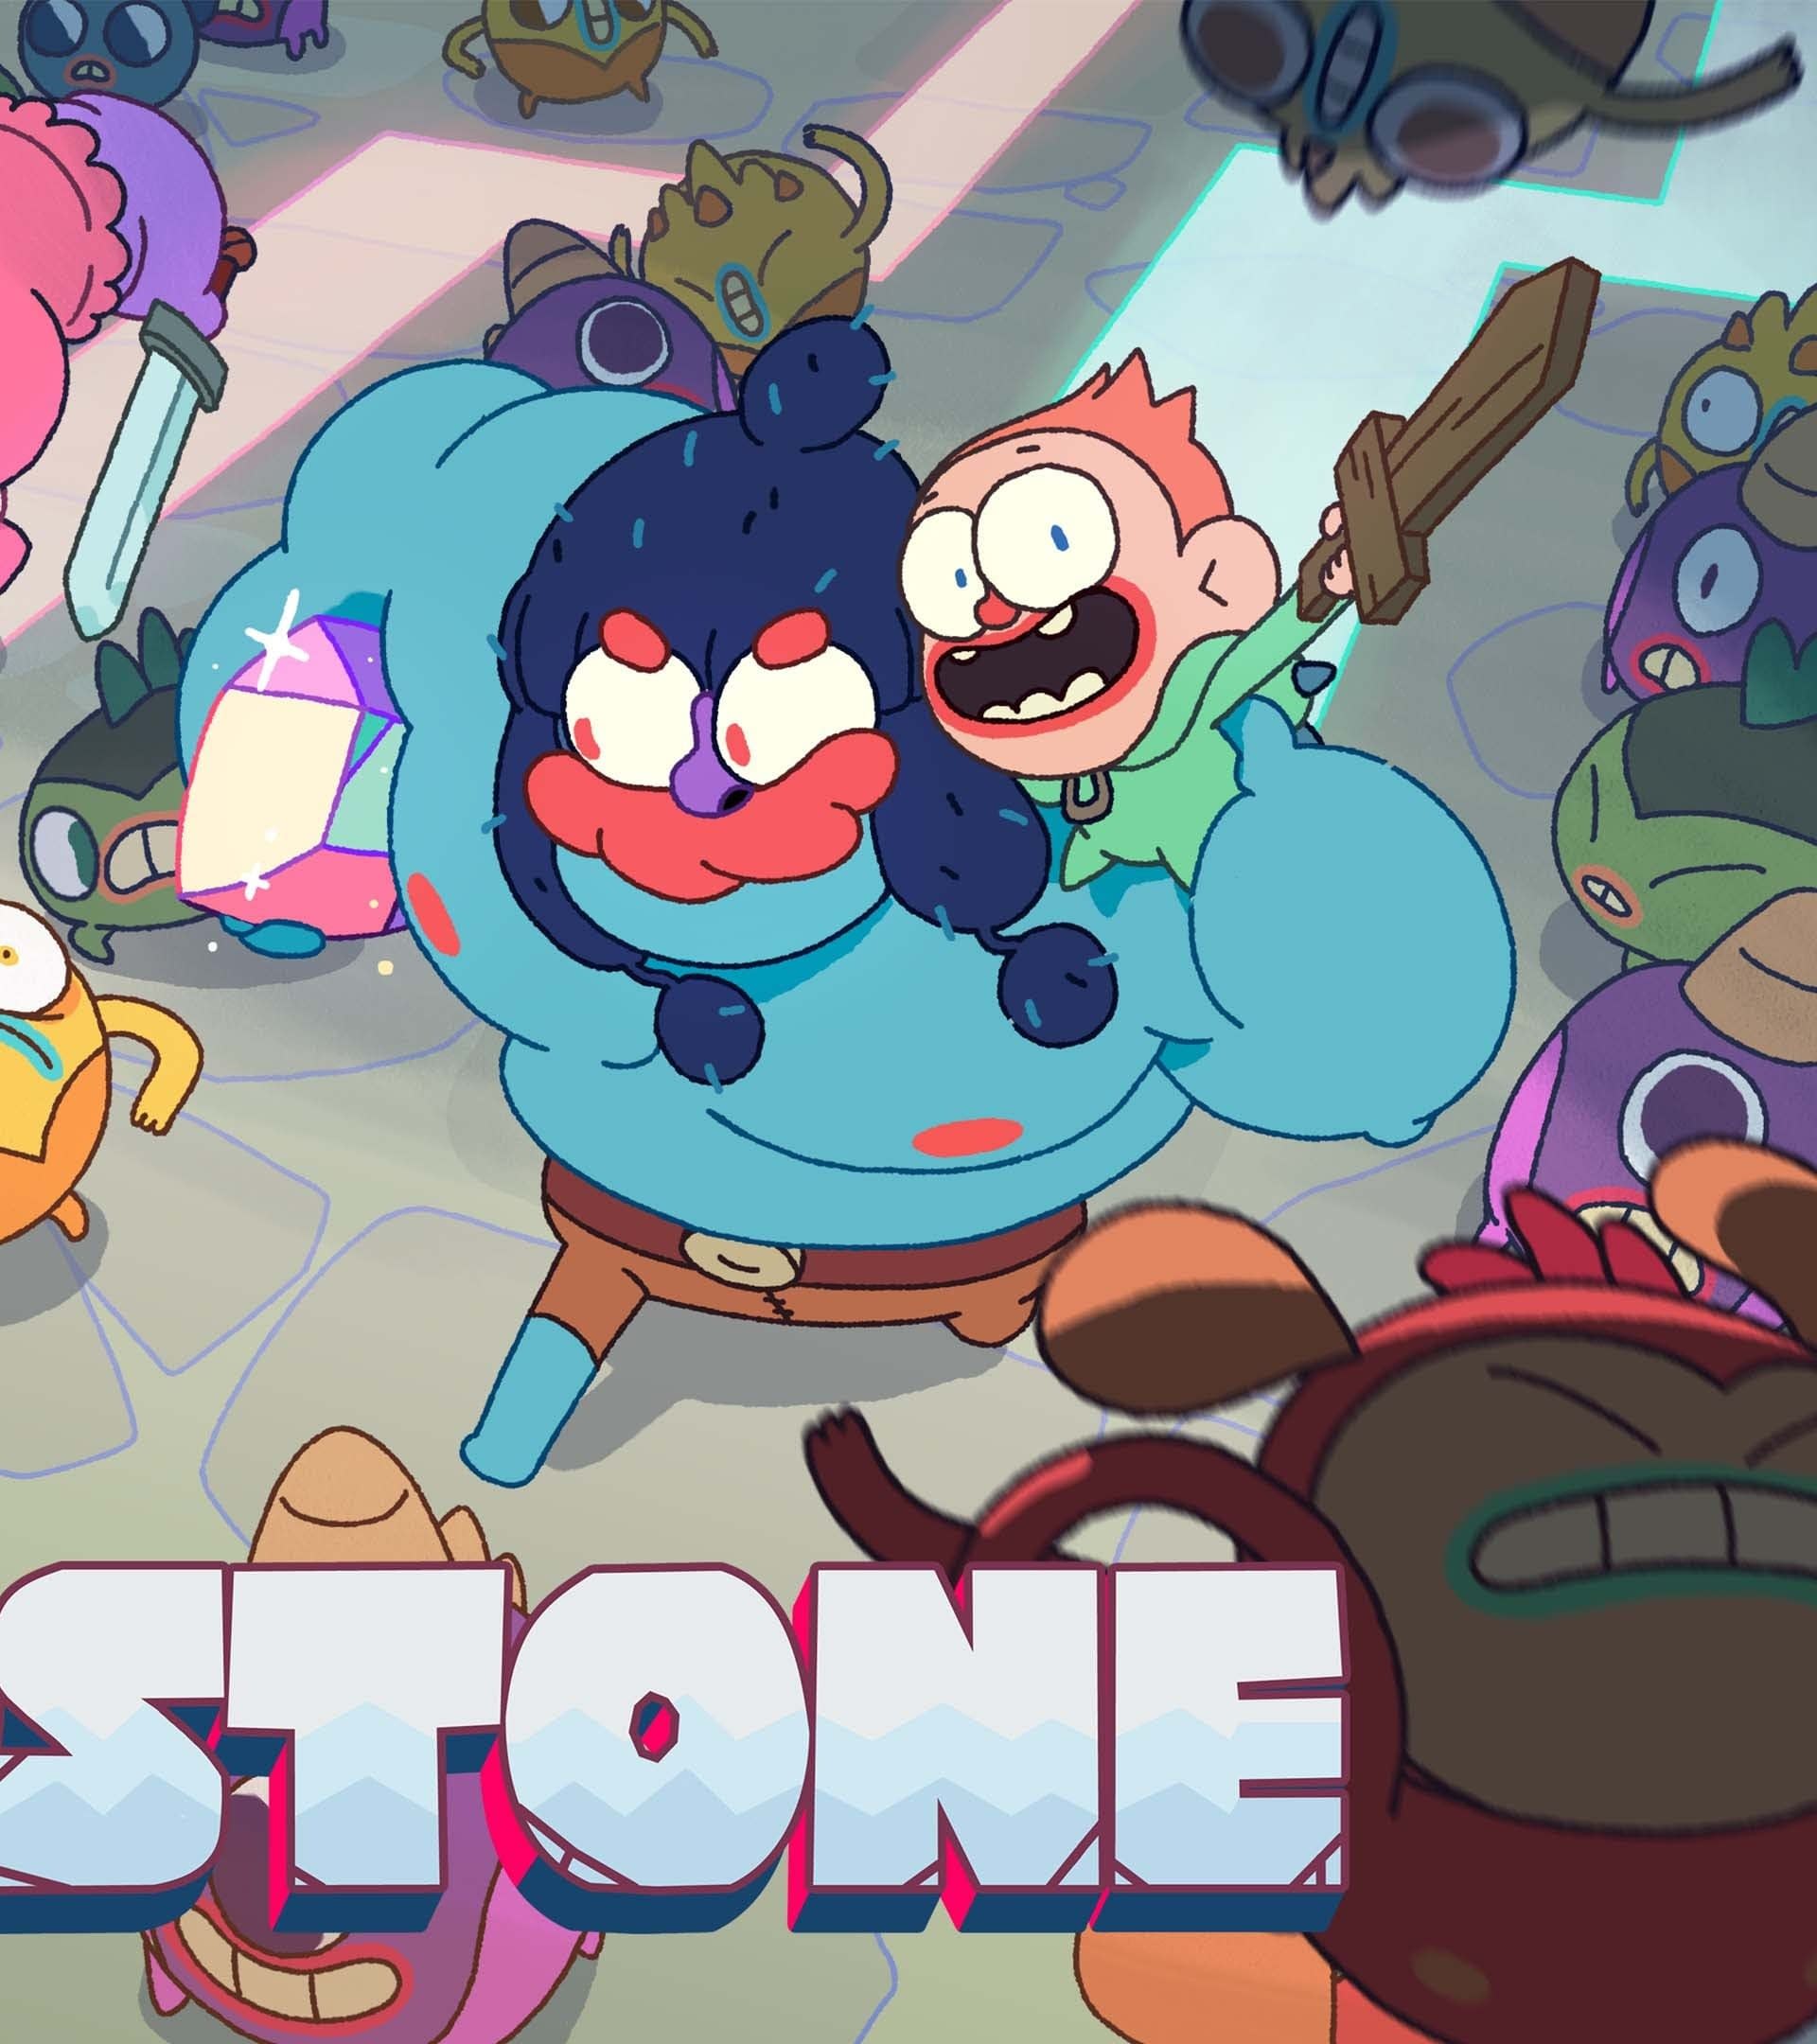 Grindstone is now available for PS4, PS5 and Xbox Series